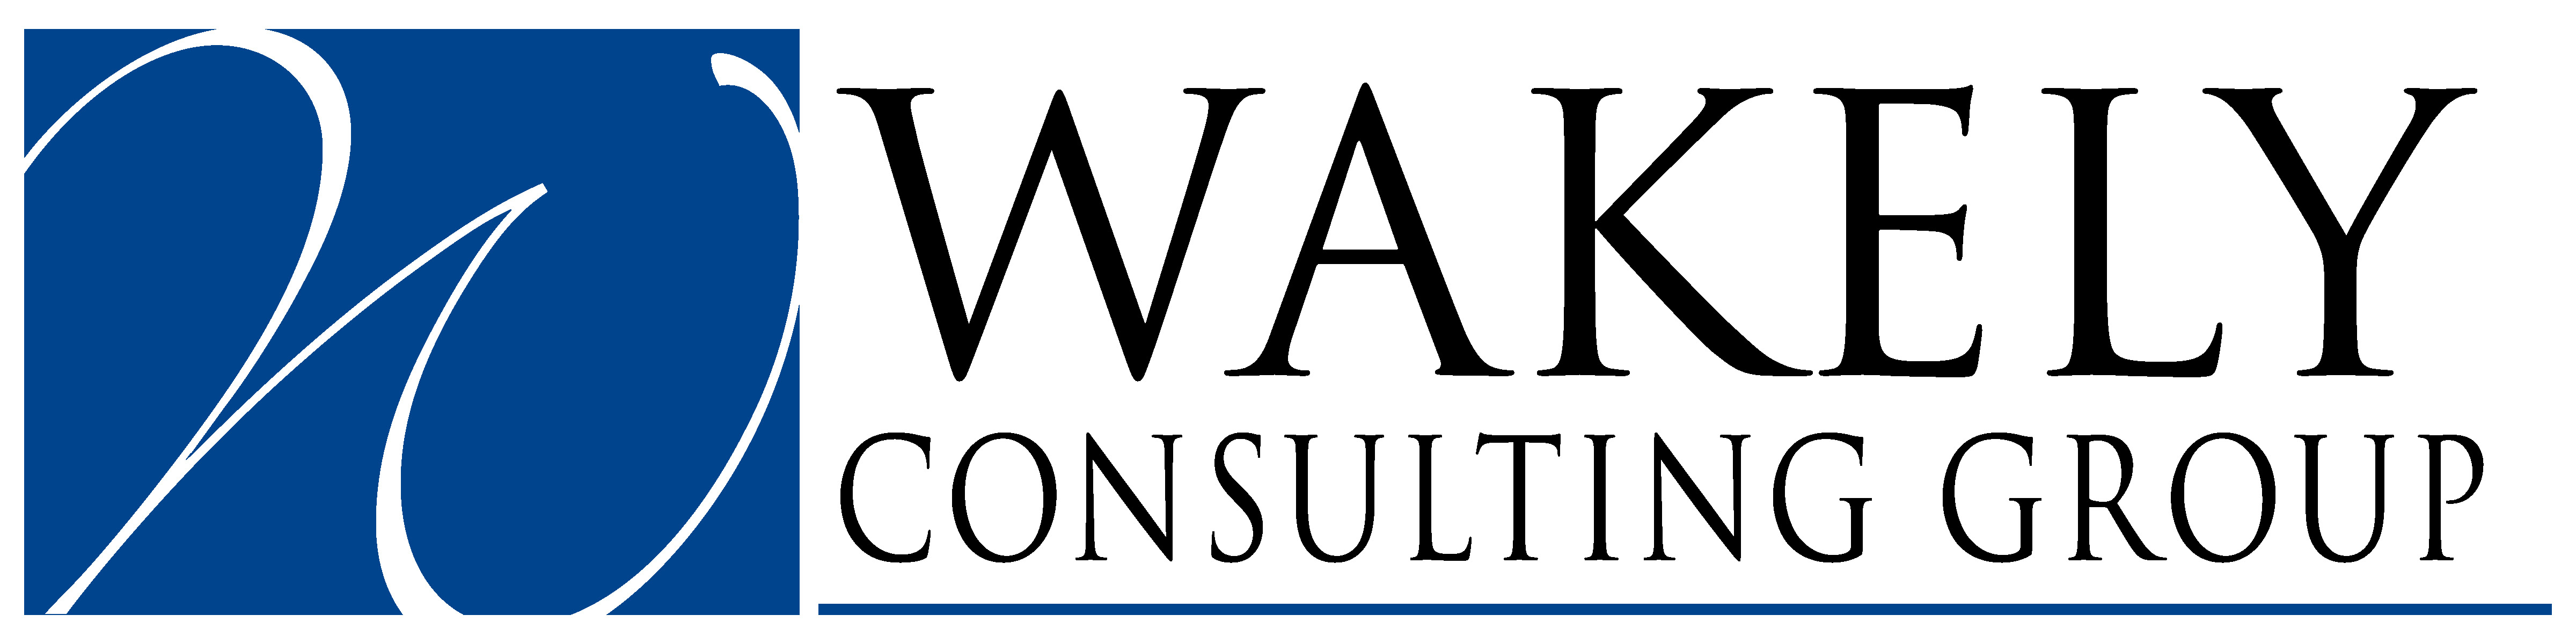 Association For Community Affiliated Plans || Wakely Consulting Group ...